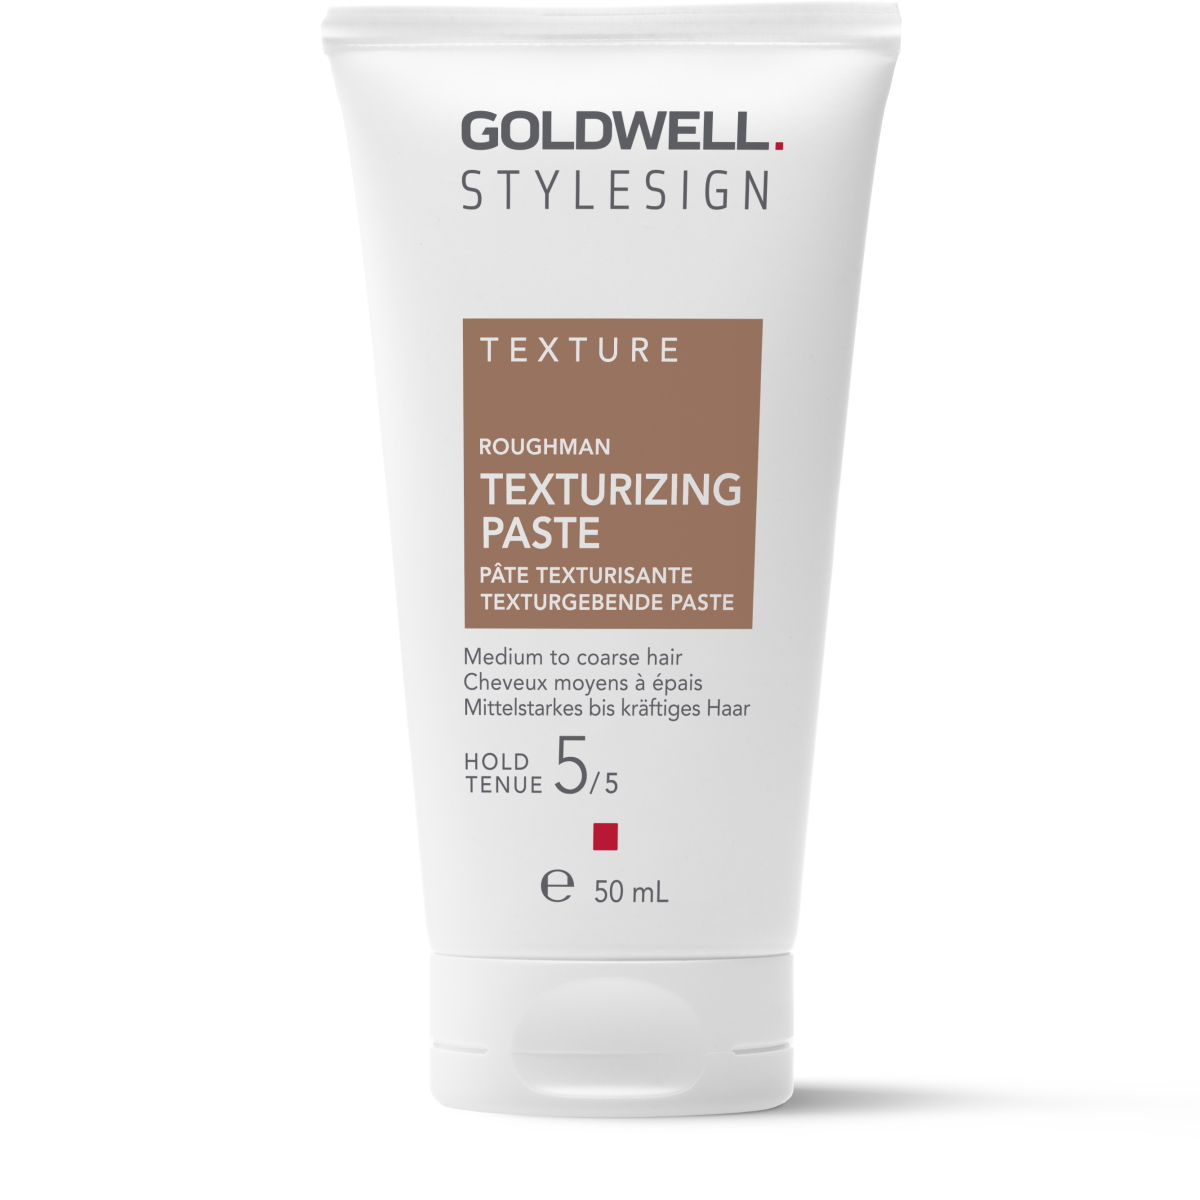 Goldwell Style Sign Texture Texturizing Paste 50ml